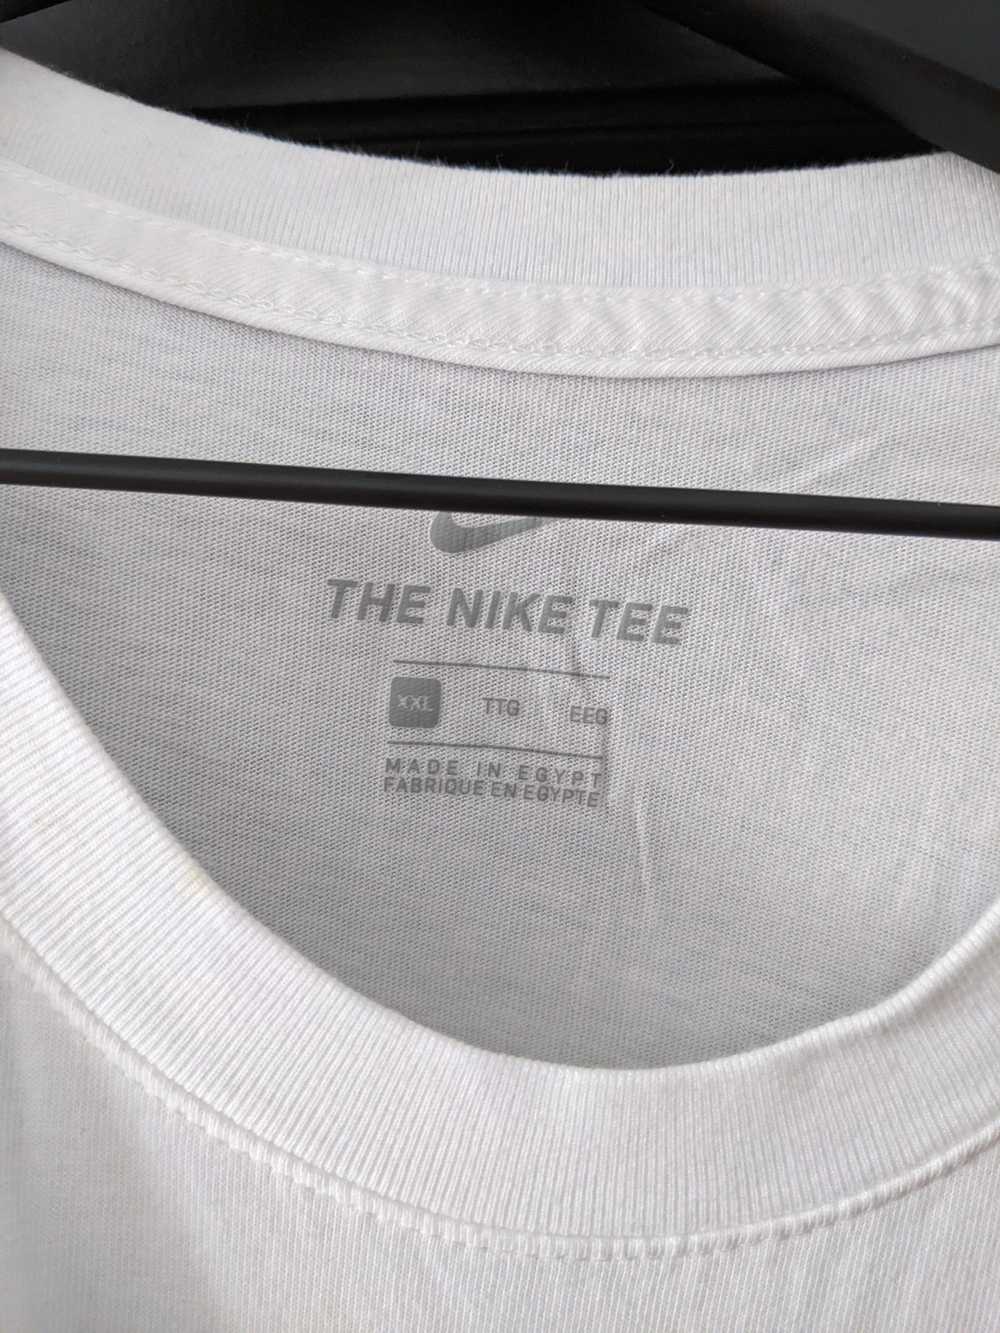 Nike 2-Pack "Over Branding" Nike Cotton T-Shirts - image 7